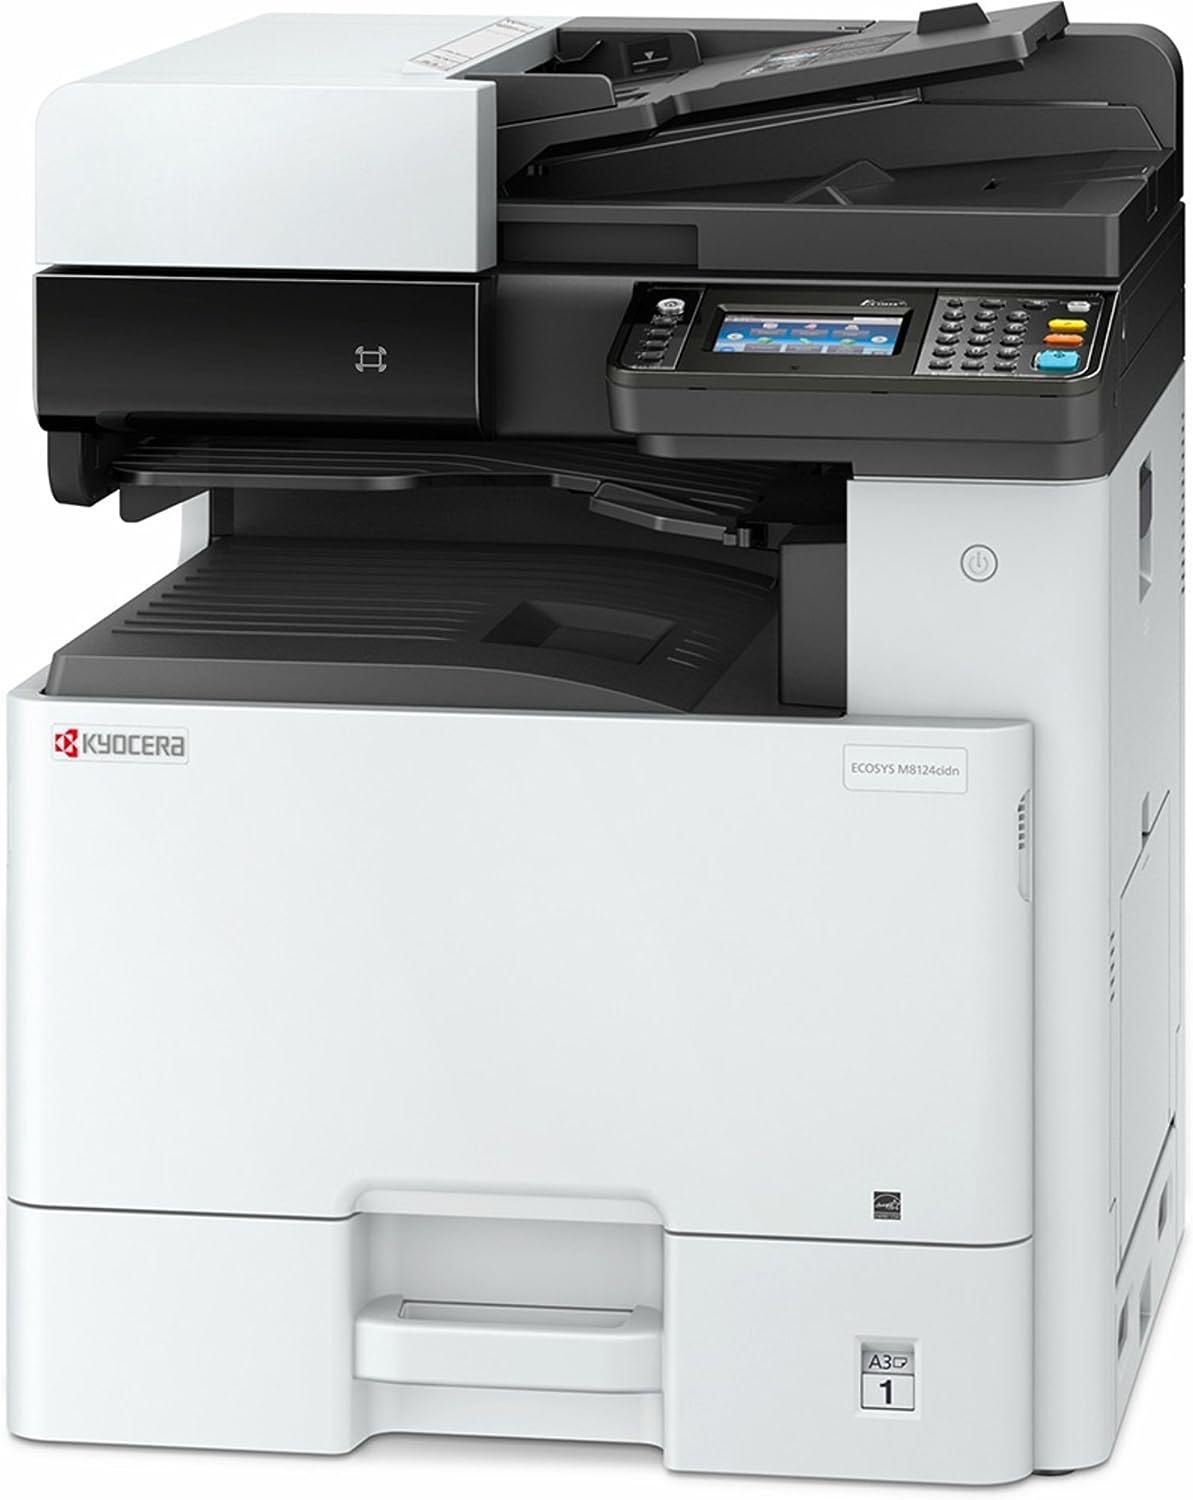 A3 Color Laser Printer Troubleshooting | A3 Printer